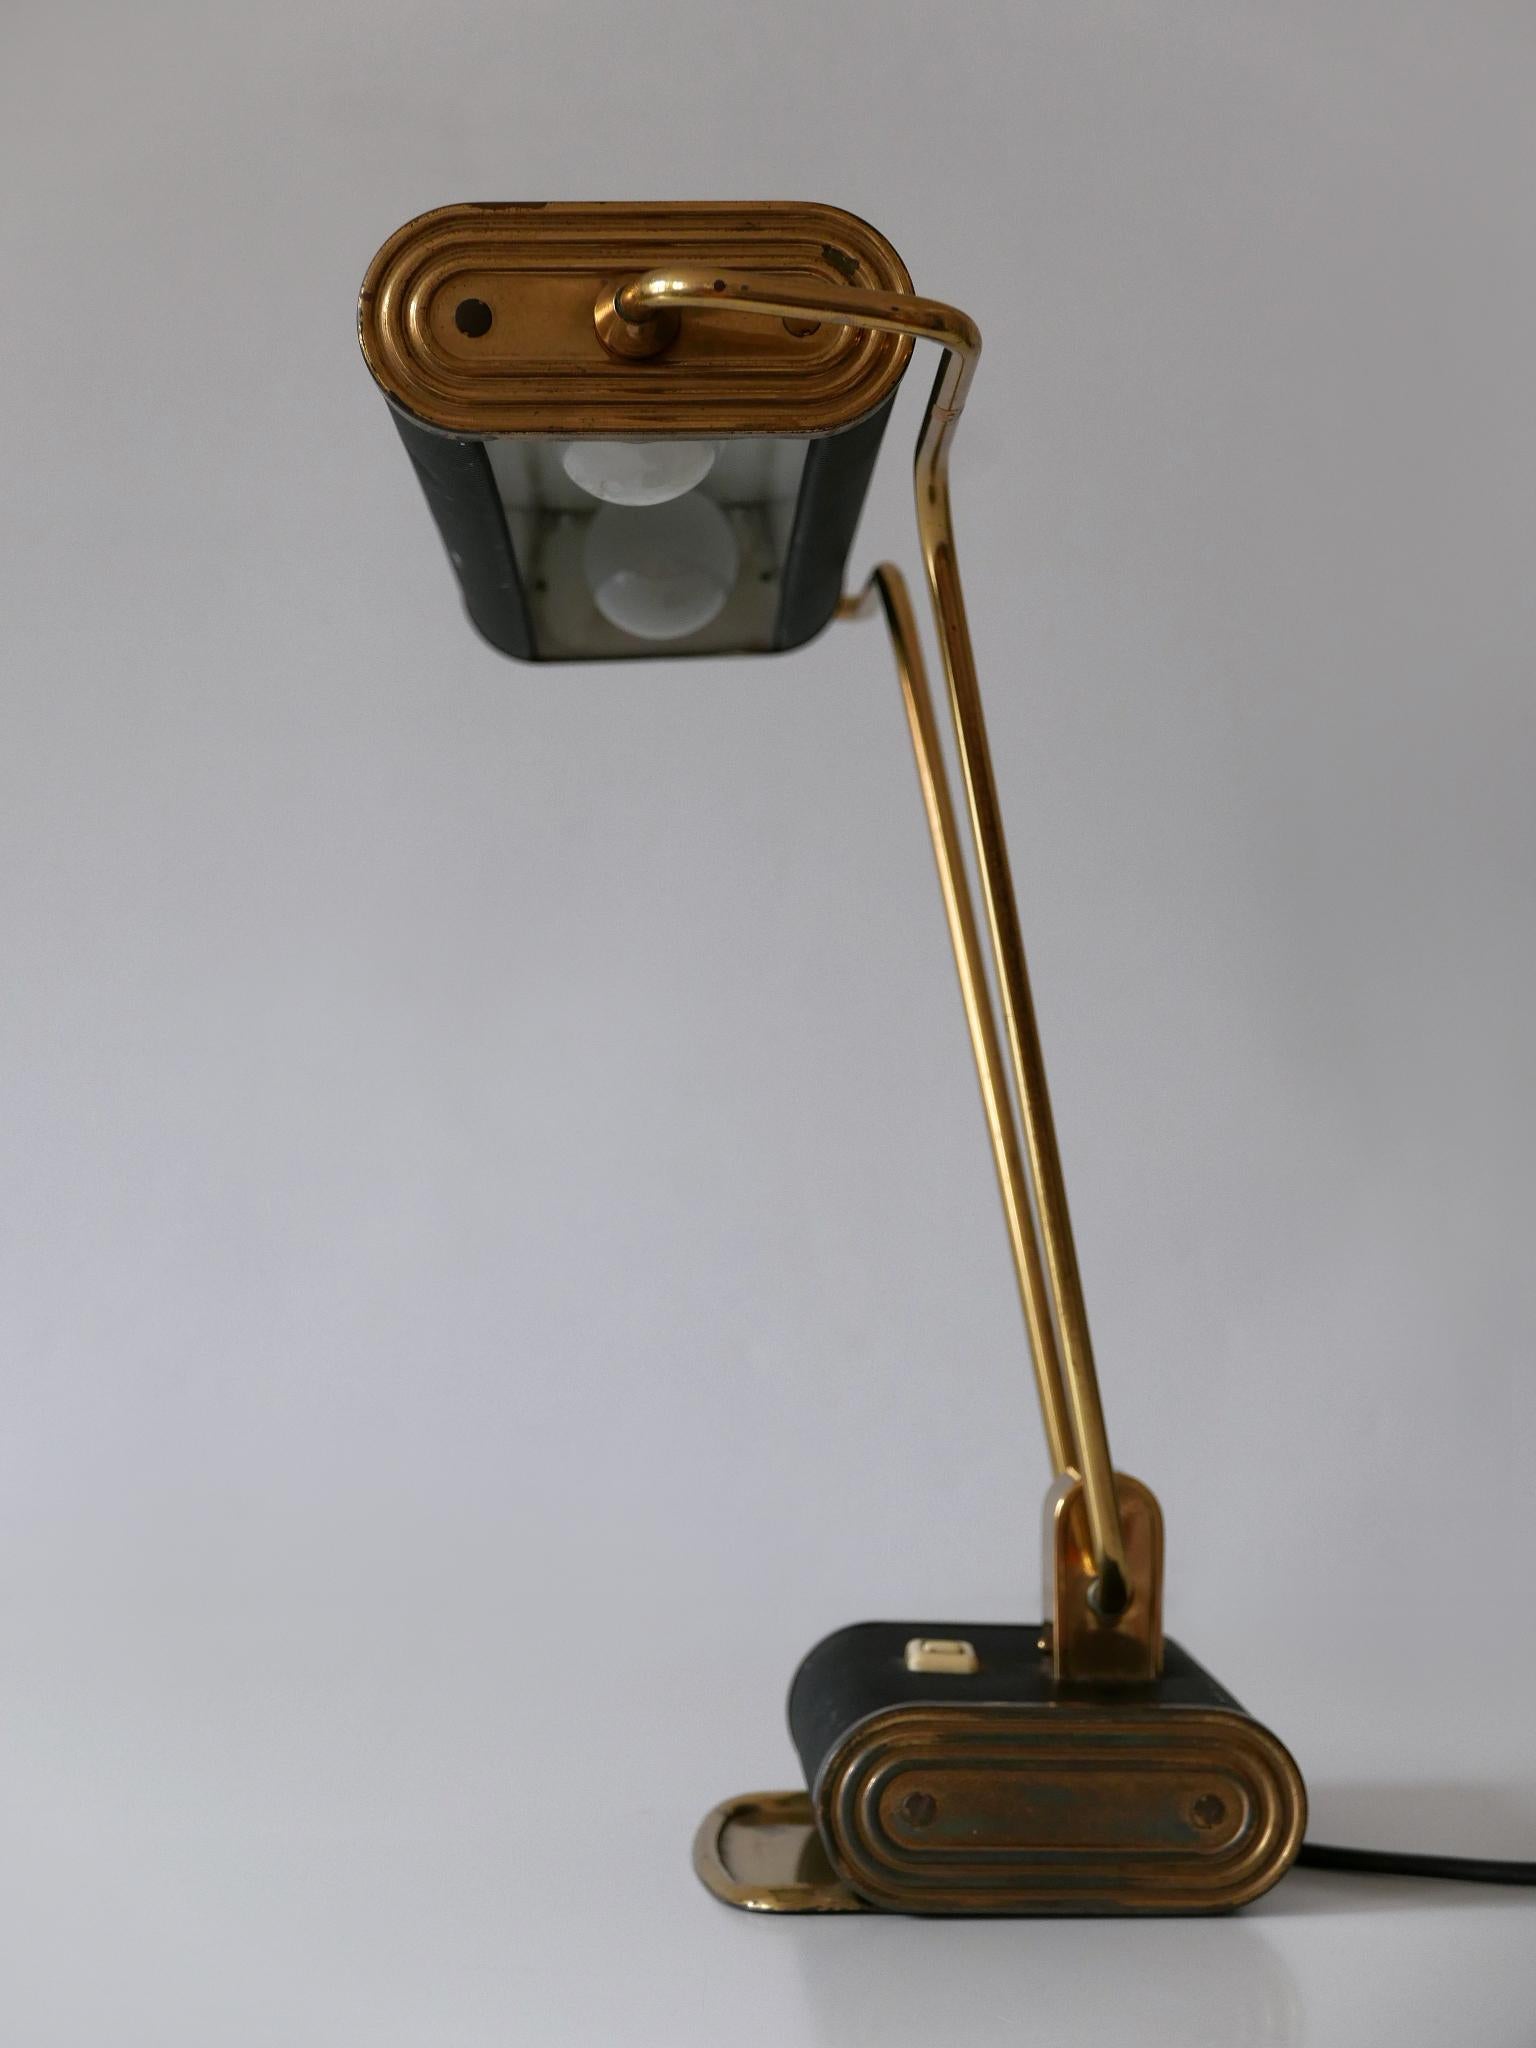 Art Deco Table Lamp or Desk Light 'No 71' by André Mounique for Jumo 1930s For Sale 6